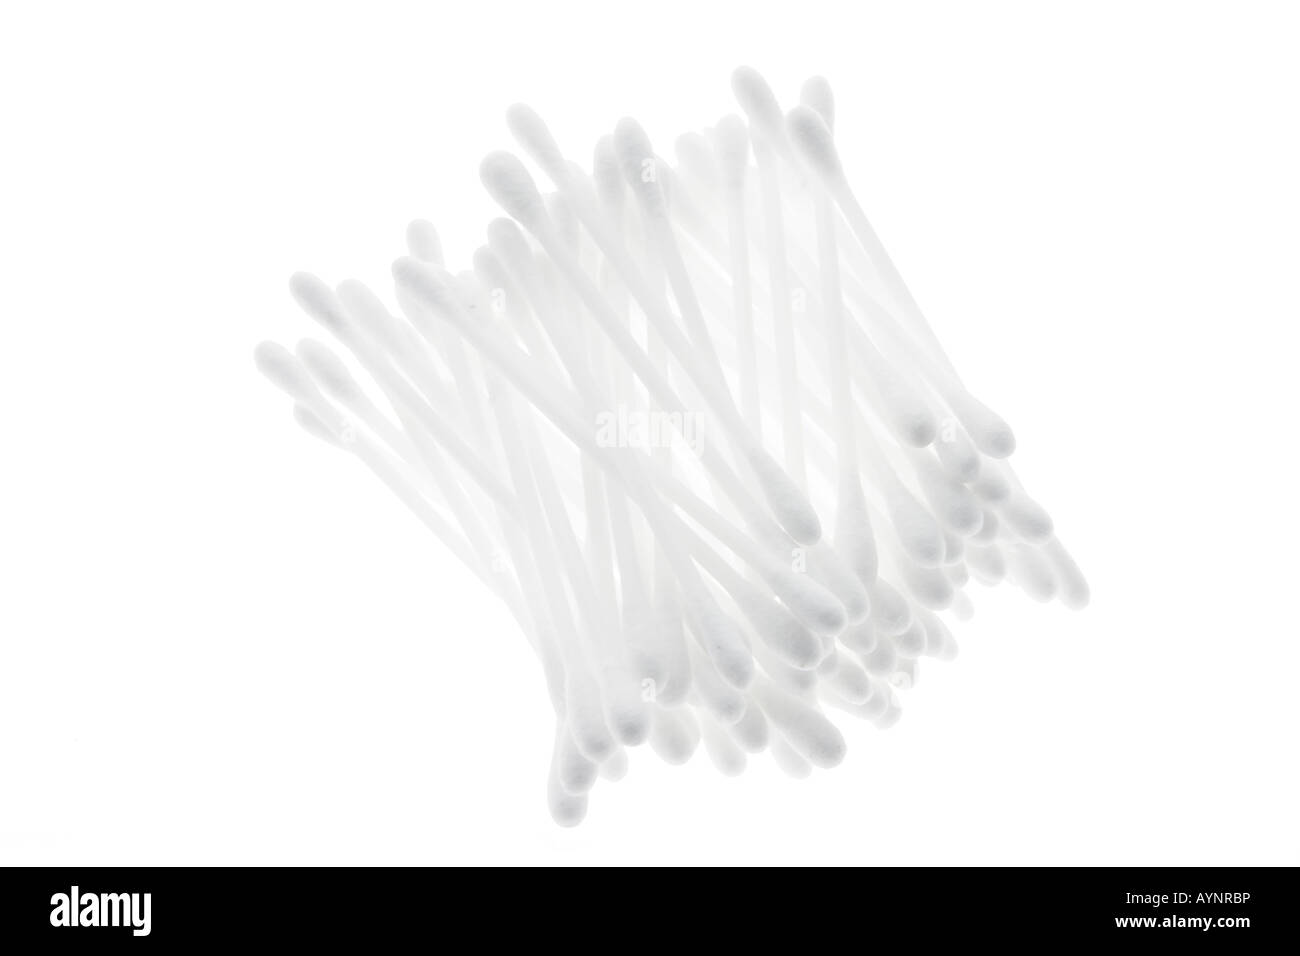 Tree Raw Cotton Buds On White Soft Cotton Textured Background Stock Photo,  Picture and Royalty Free Image. Image 107794289.